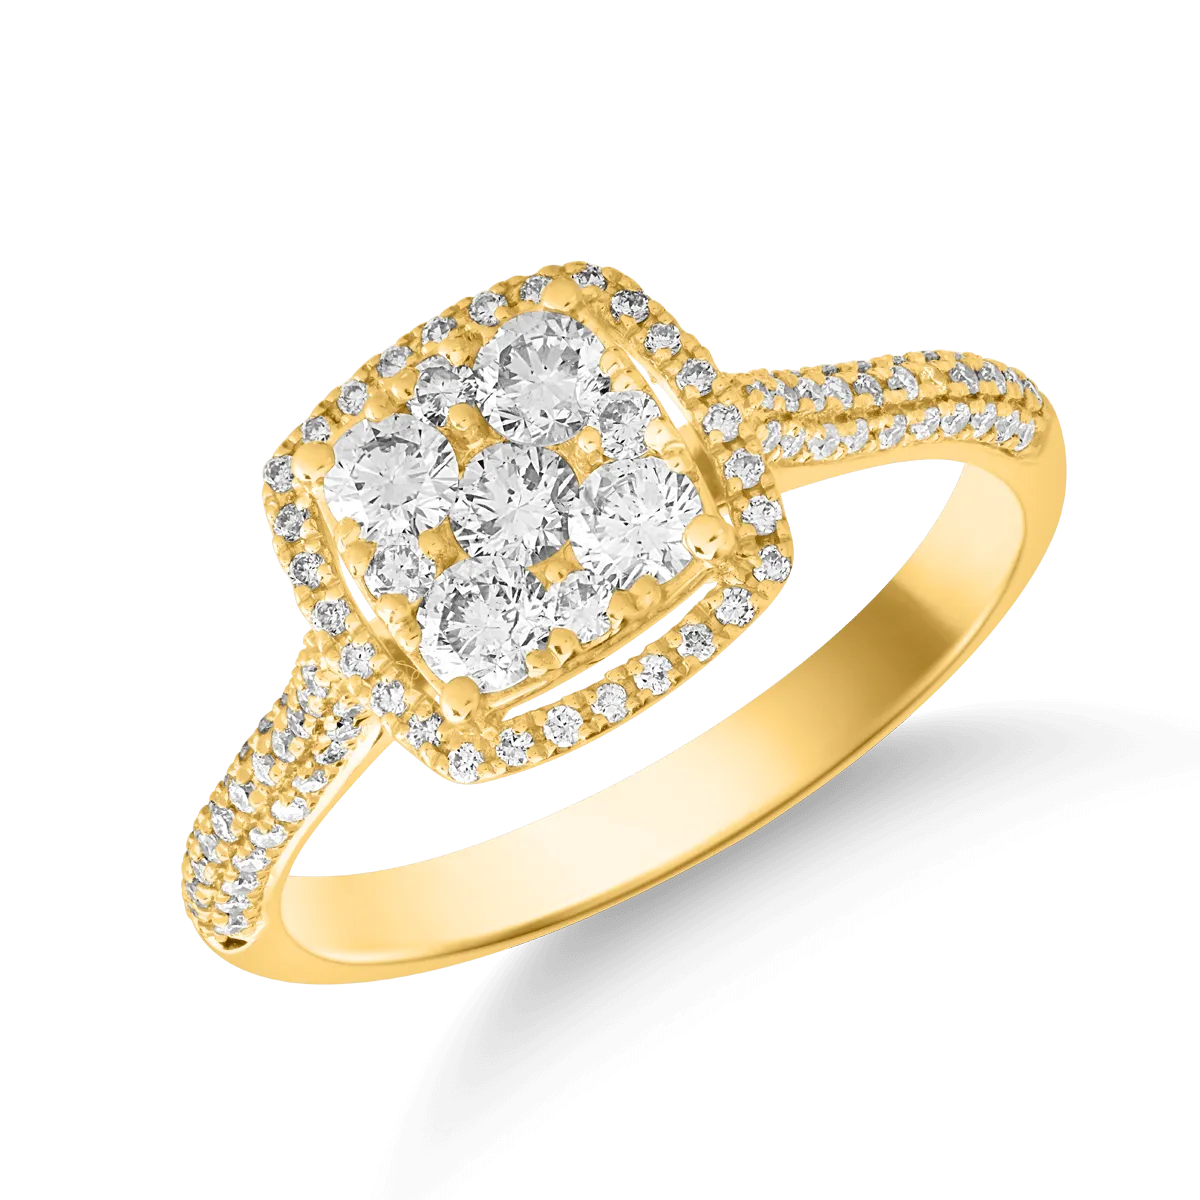 18K yellow gold ring with 0.62ct diamonds